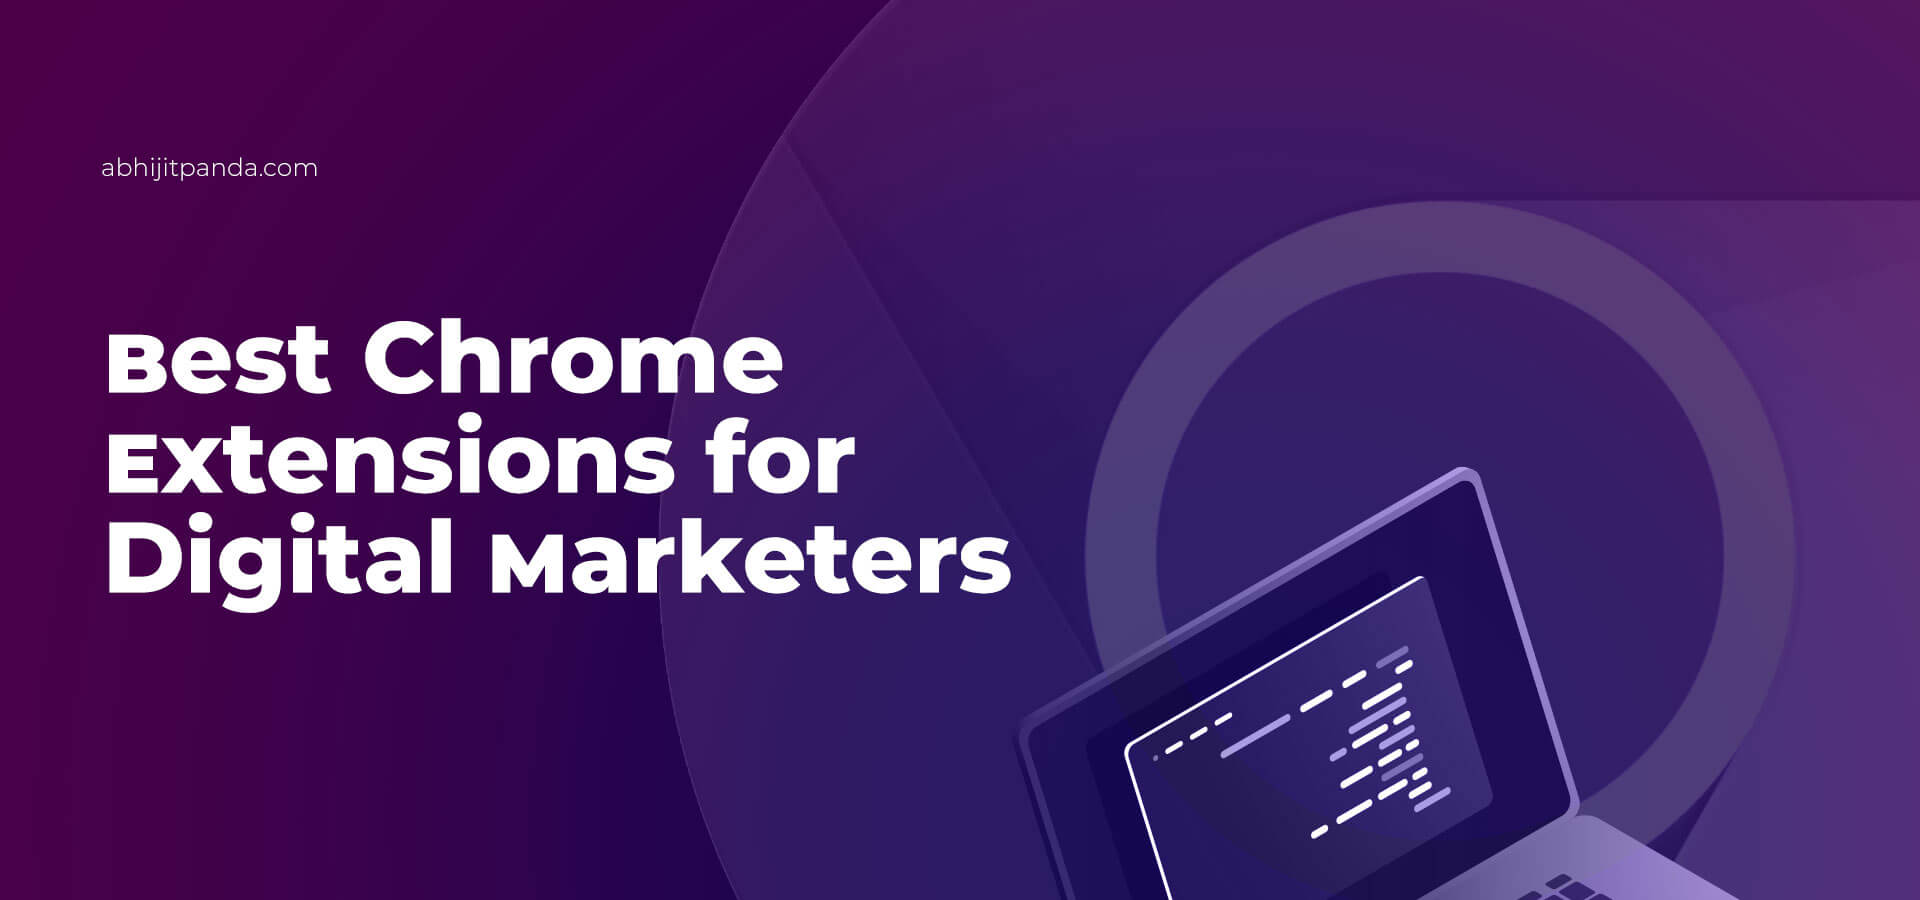 Best Chrome Extensions for Digital Marketers